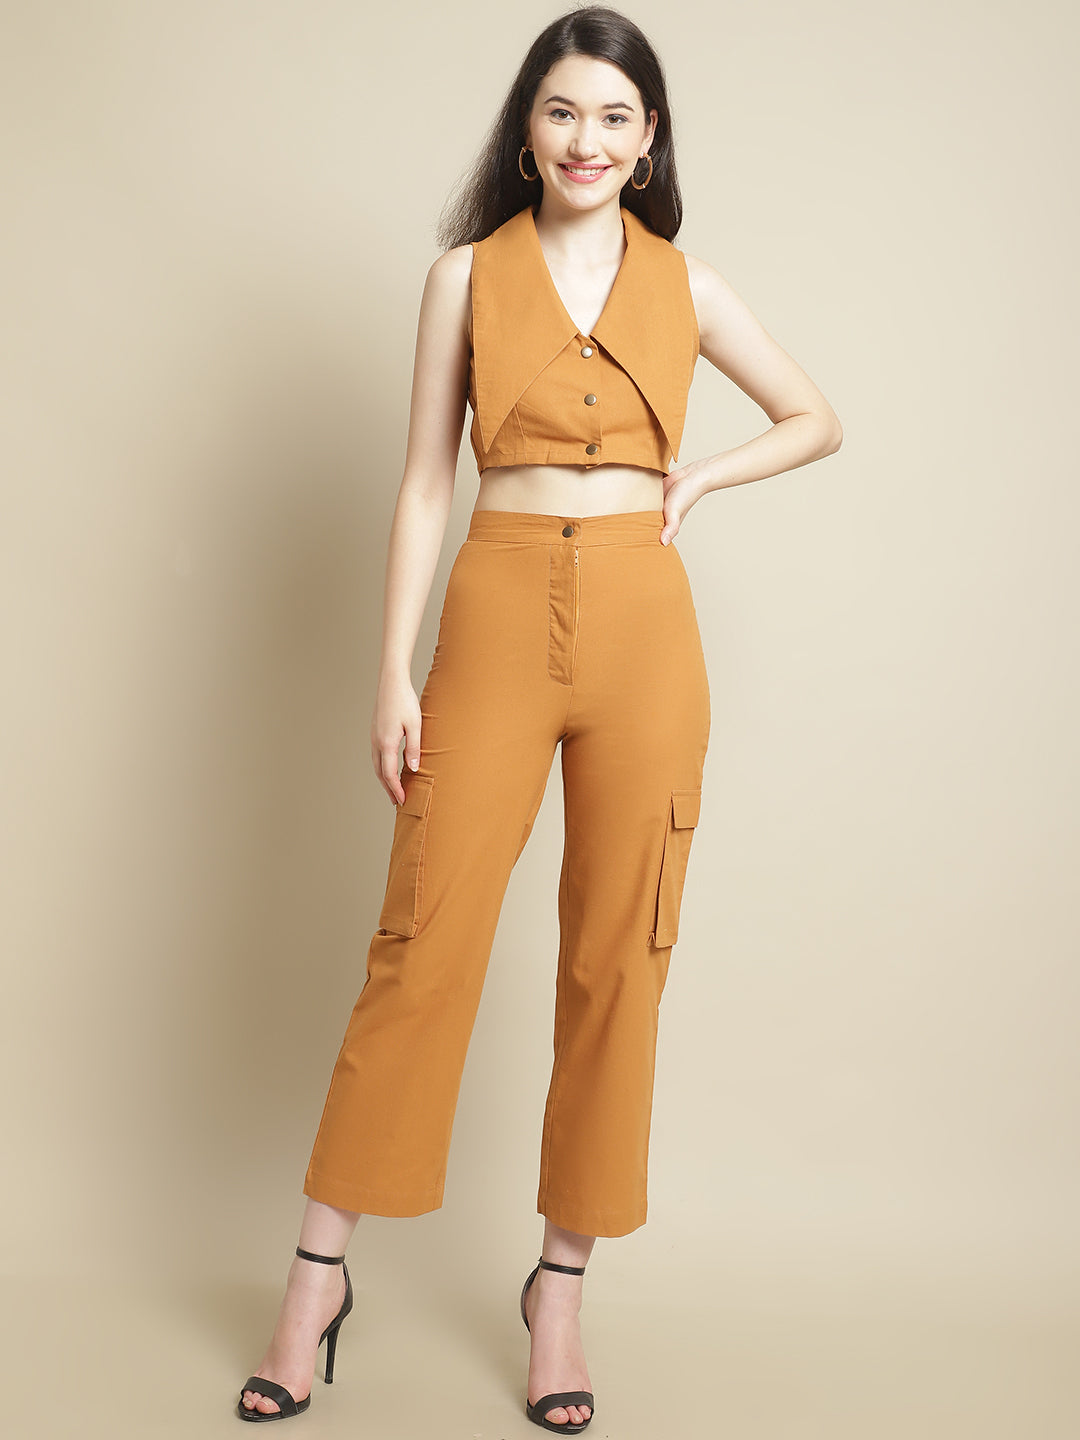 Blanc9 Mustard Crop Top With Pants-B9ST126